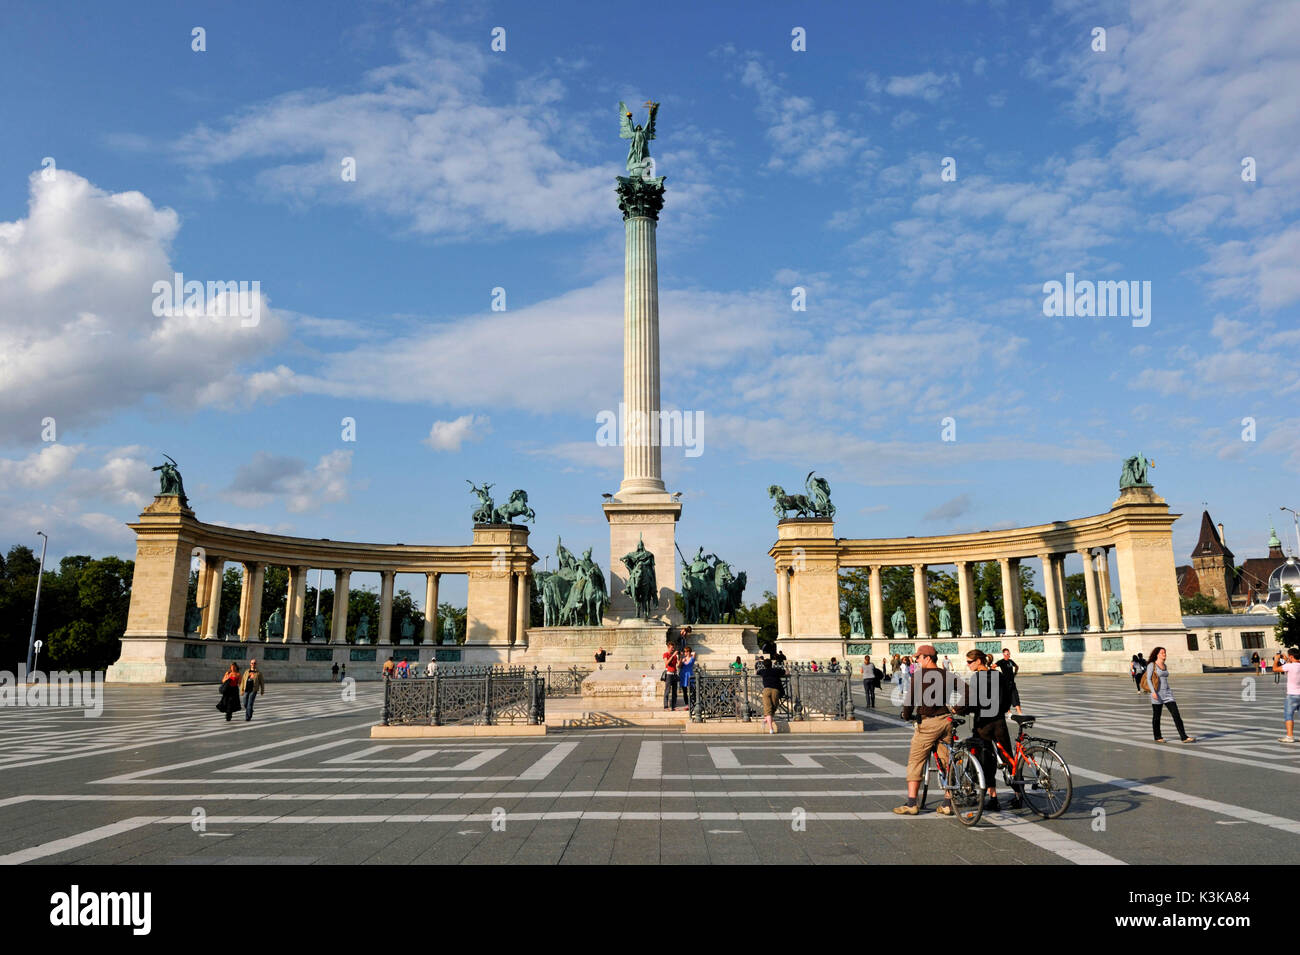 Hungary, Budapest, Heroes' Square (Hosok tere), the Millennium Monument, listed as World Heritage by UNESCO, and the column of 36 metres high with the archangel Gabriel Stock Photo